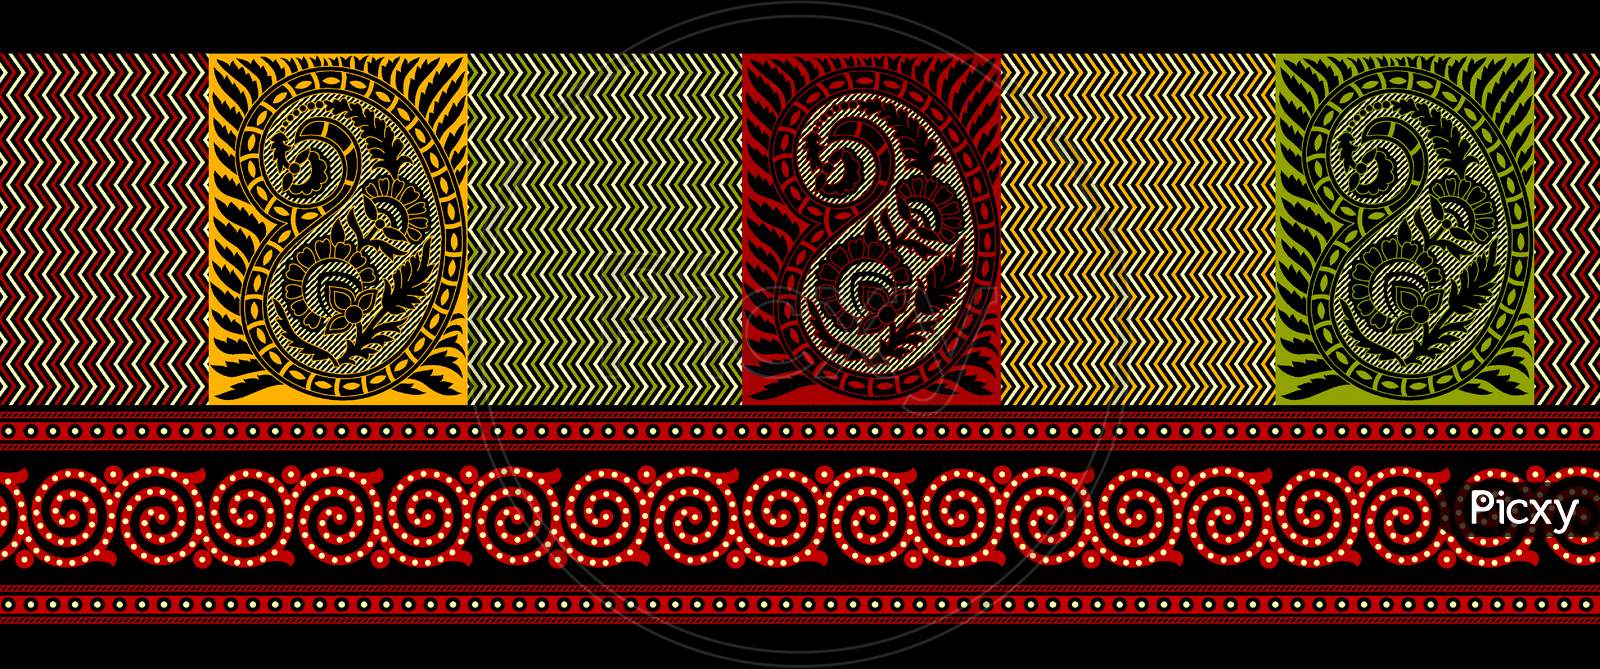 Seamless Indian Paisley Motif Border With Black Background